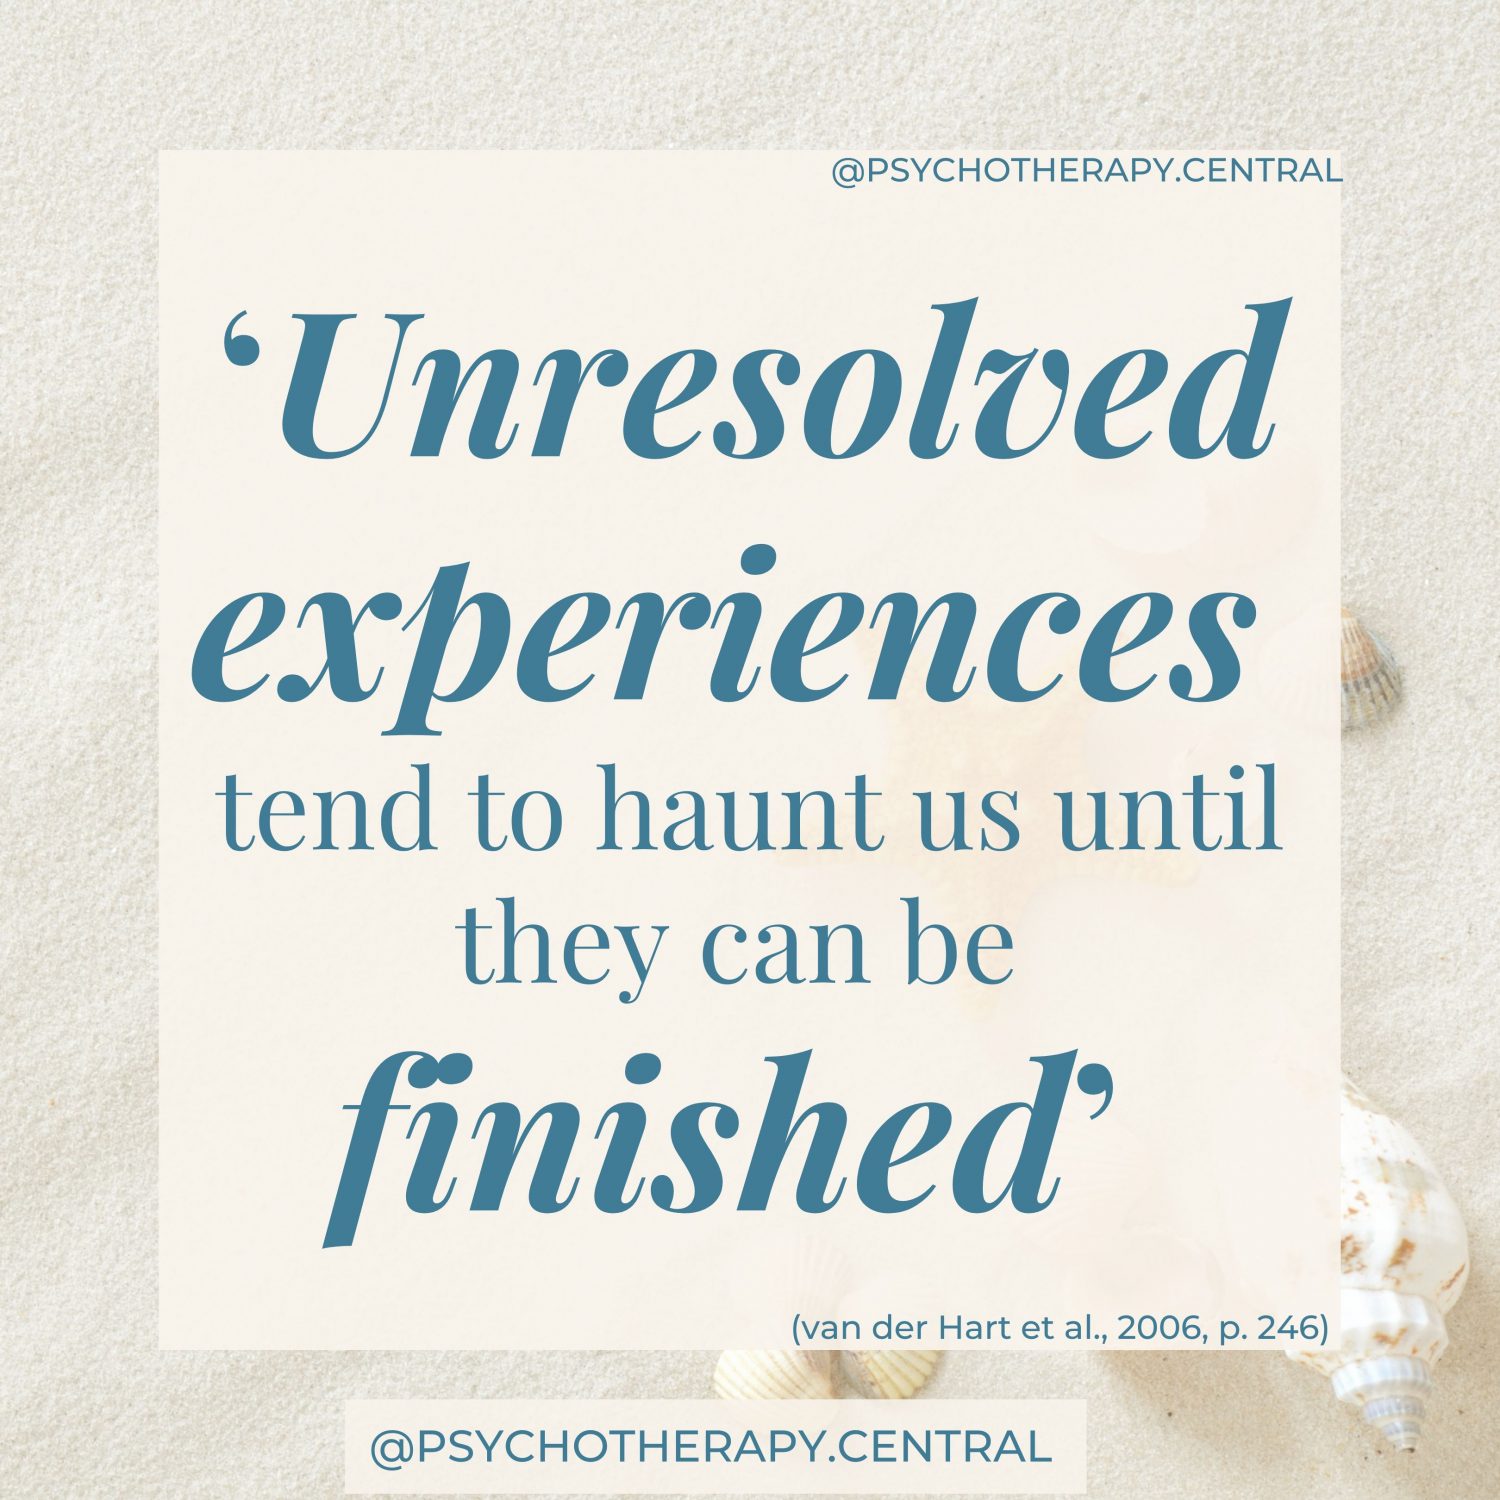 Unresolved experiences tend to haunt us until they can be finished’